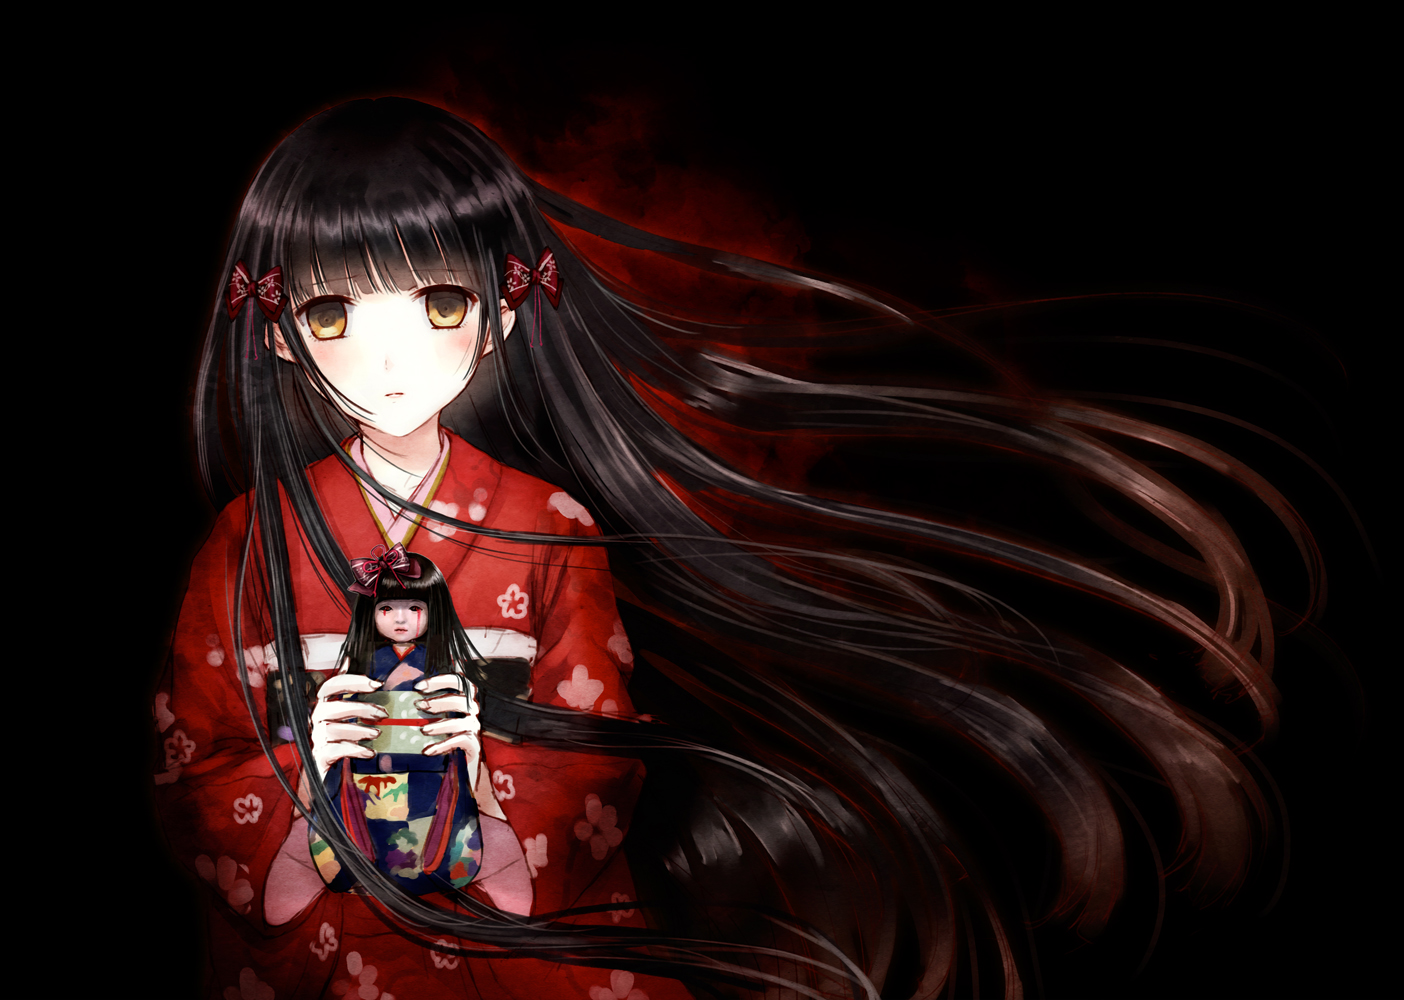 Iwaihime Backgrounds, Compatible - PC, Mobile, Gadgets| 1404x1000 px